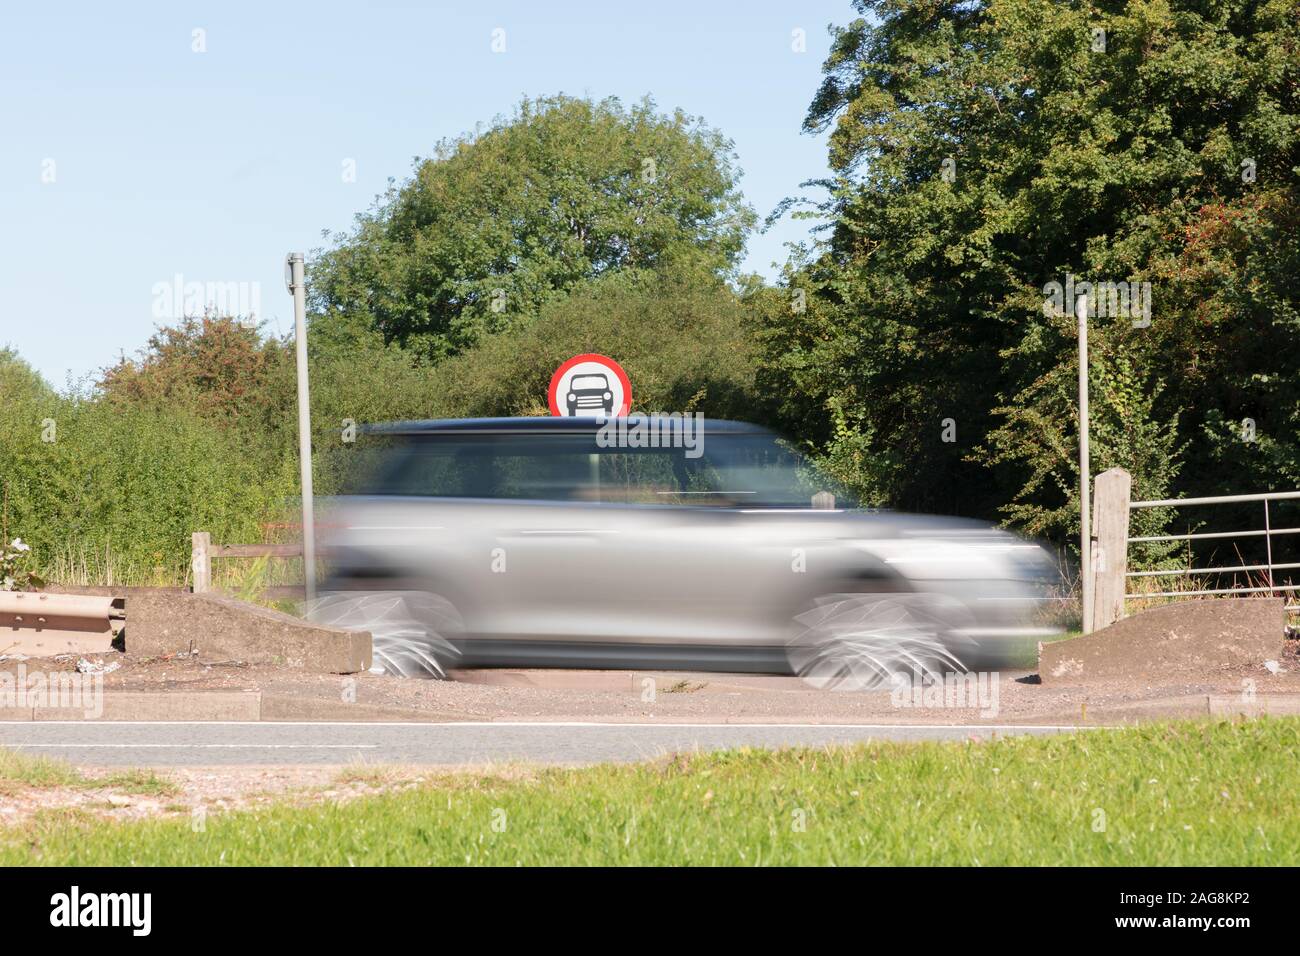 Crick, Northamptonshire, UK: A silver car, blurred by speed, passes a circular No Cars roadsign which is visible just above the car's roof. Stock Photo